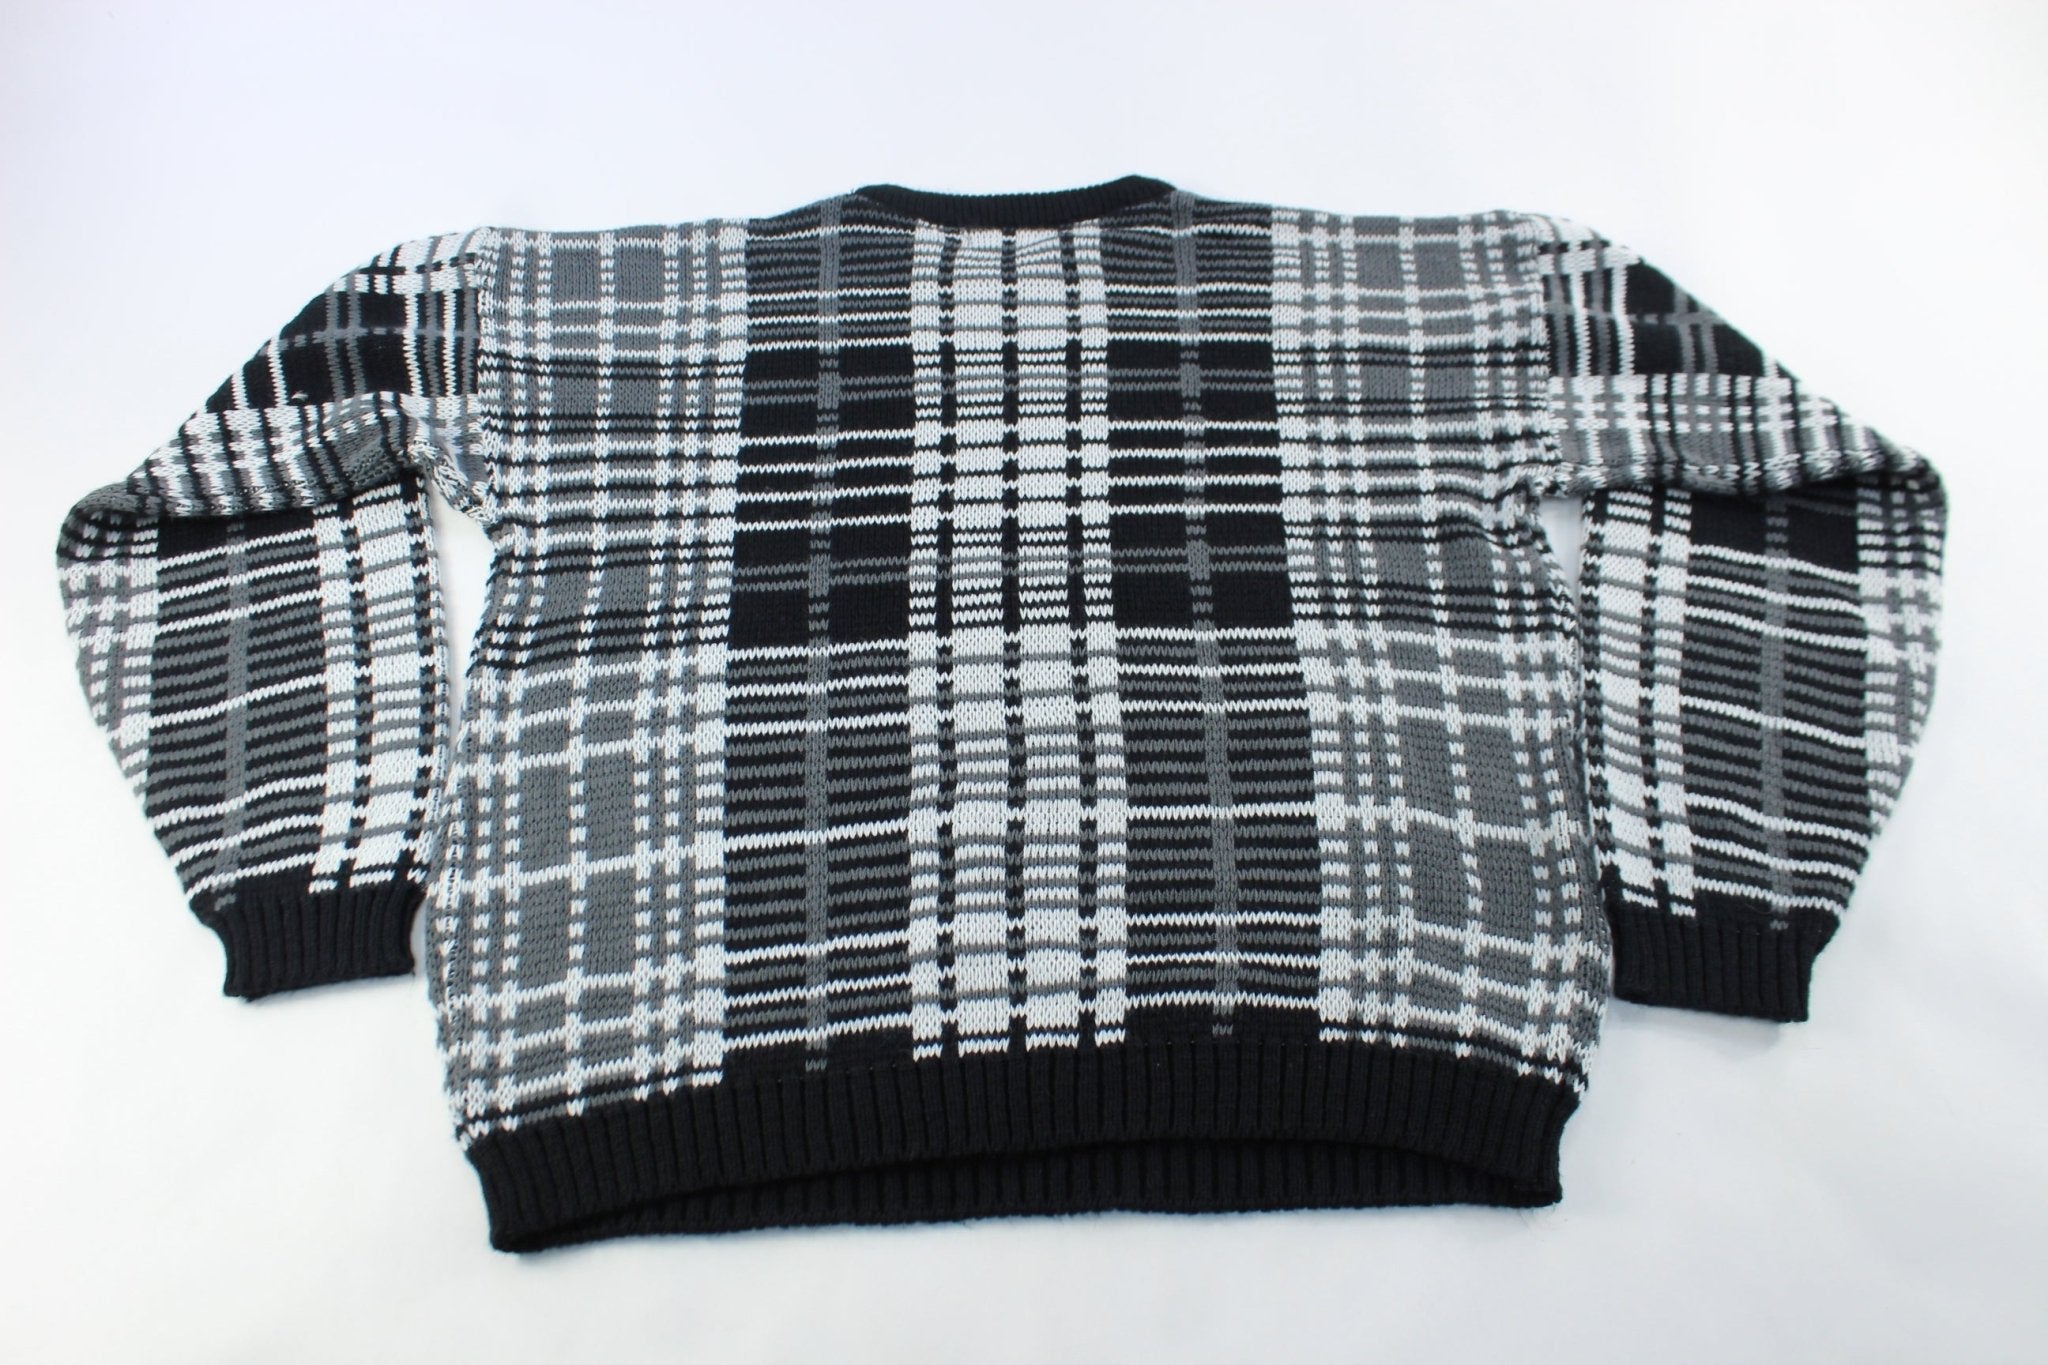 American Weekend Geometric Patterned Sweater - ThriftedThreads.com